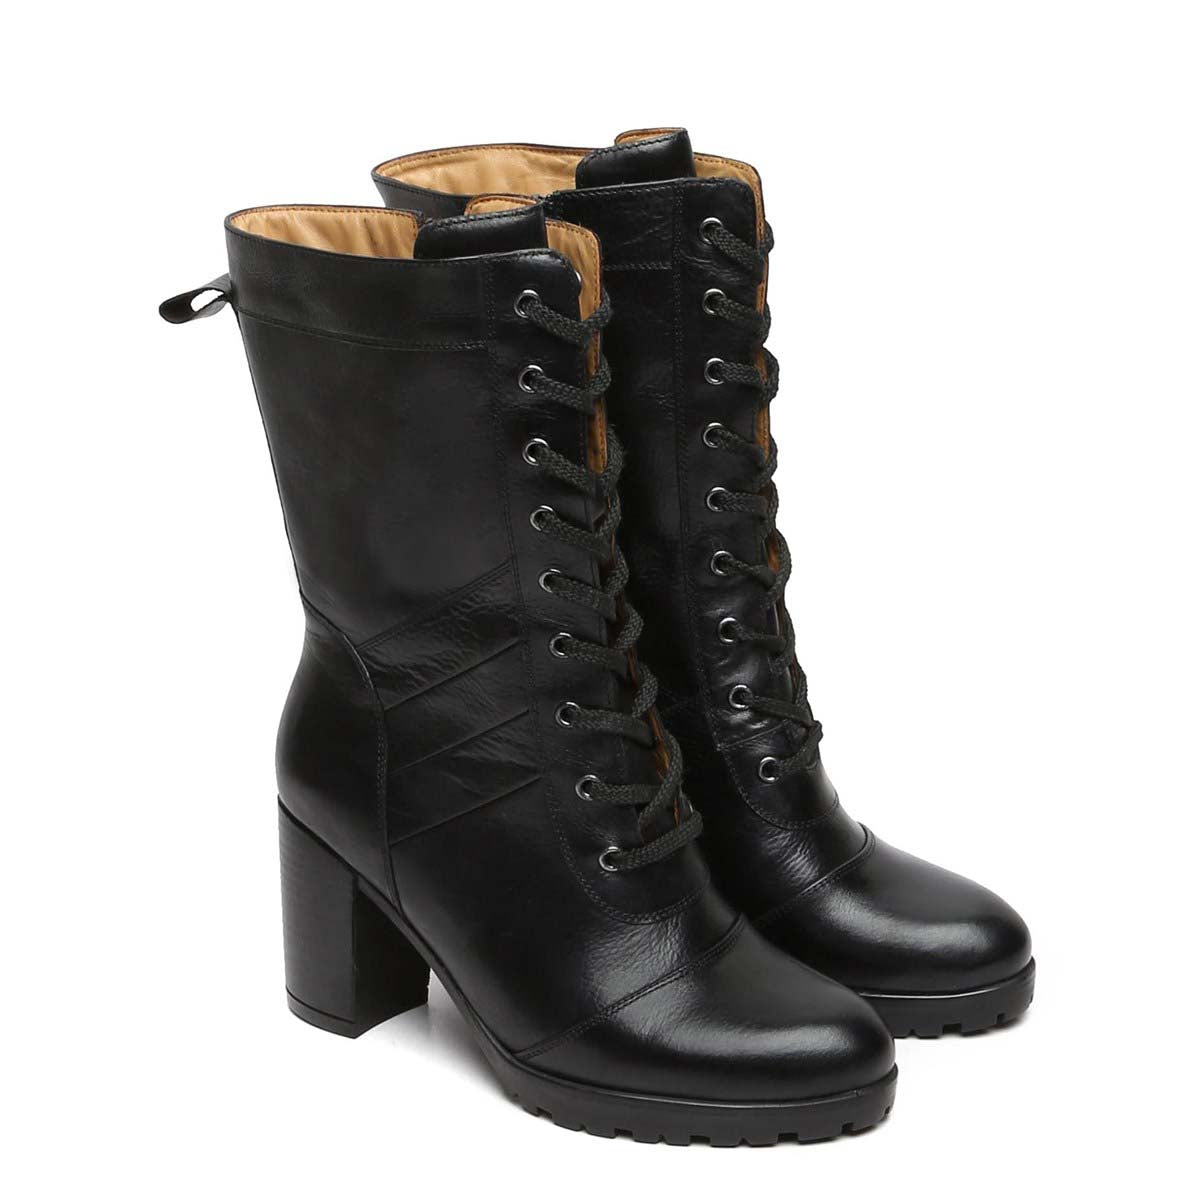 Black Leather Long Lace Up Ladies Boots By Brune & Bareskin